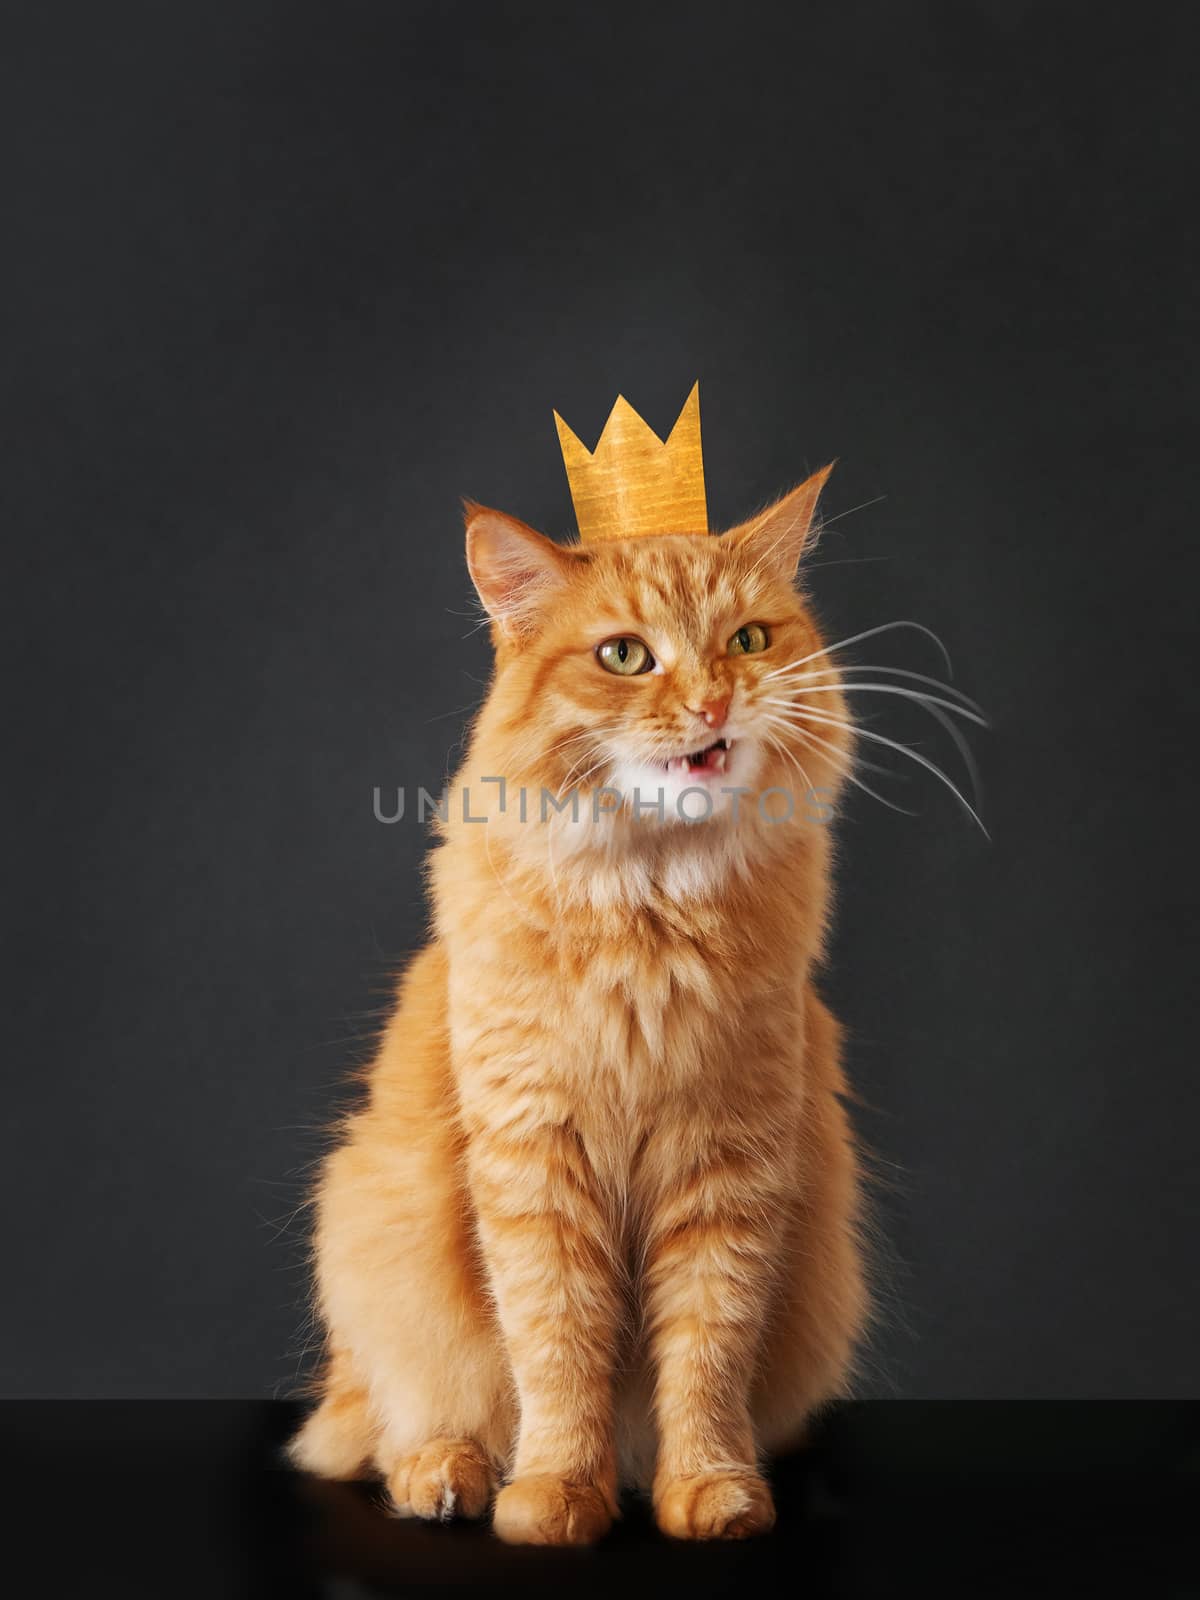 Cute ginger cat with awesome expression on face and golden crown by aksenovko